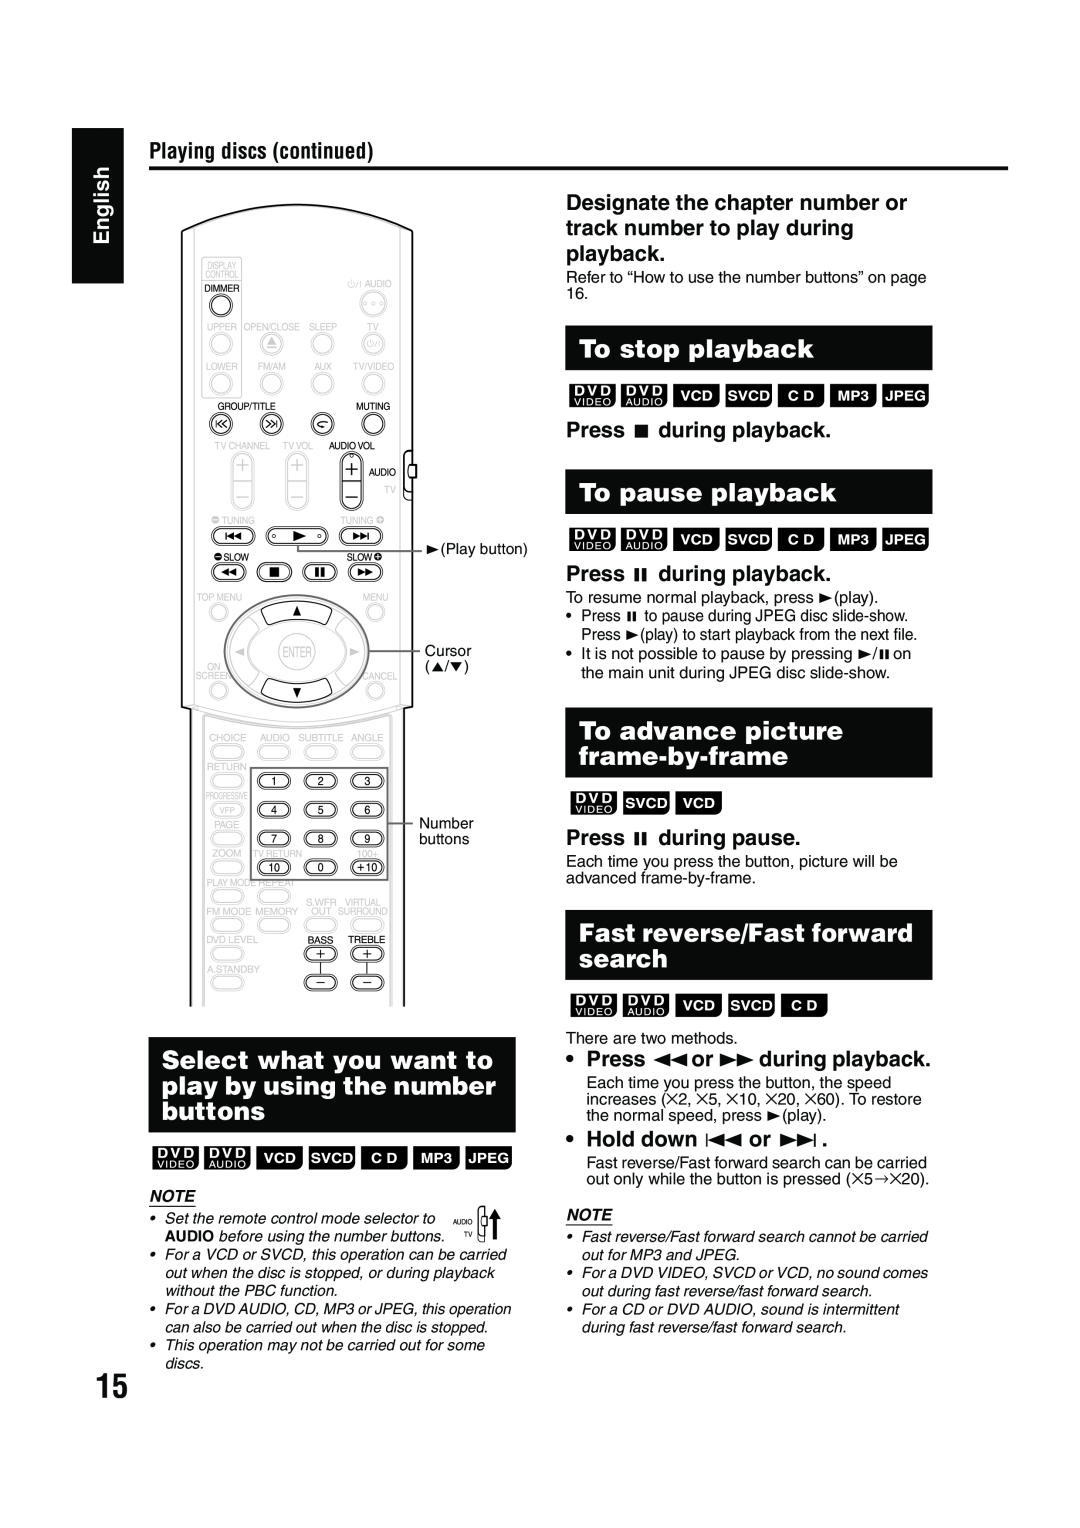 JVC EX-A5 manual To stop playback, To pause playback, To advance picture frame-by-frame, Fast reverse/Fast forward search 